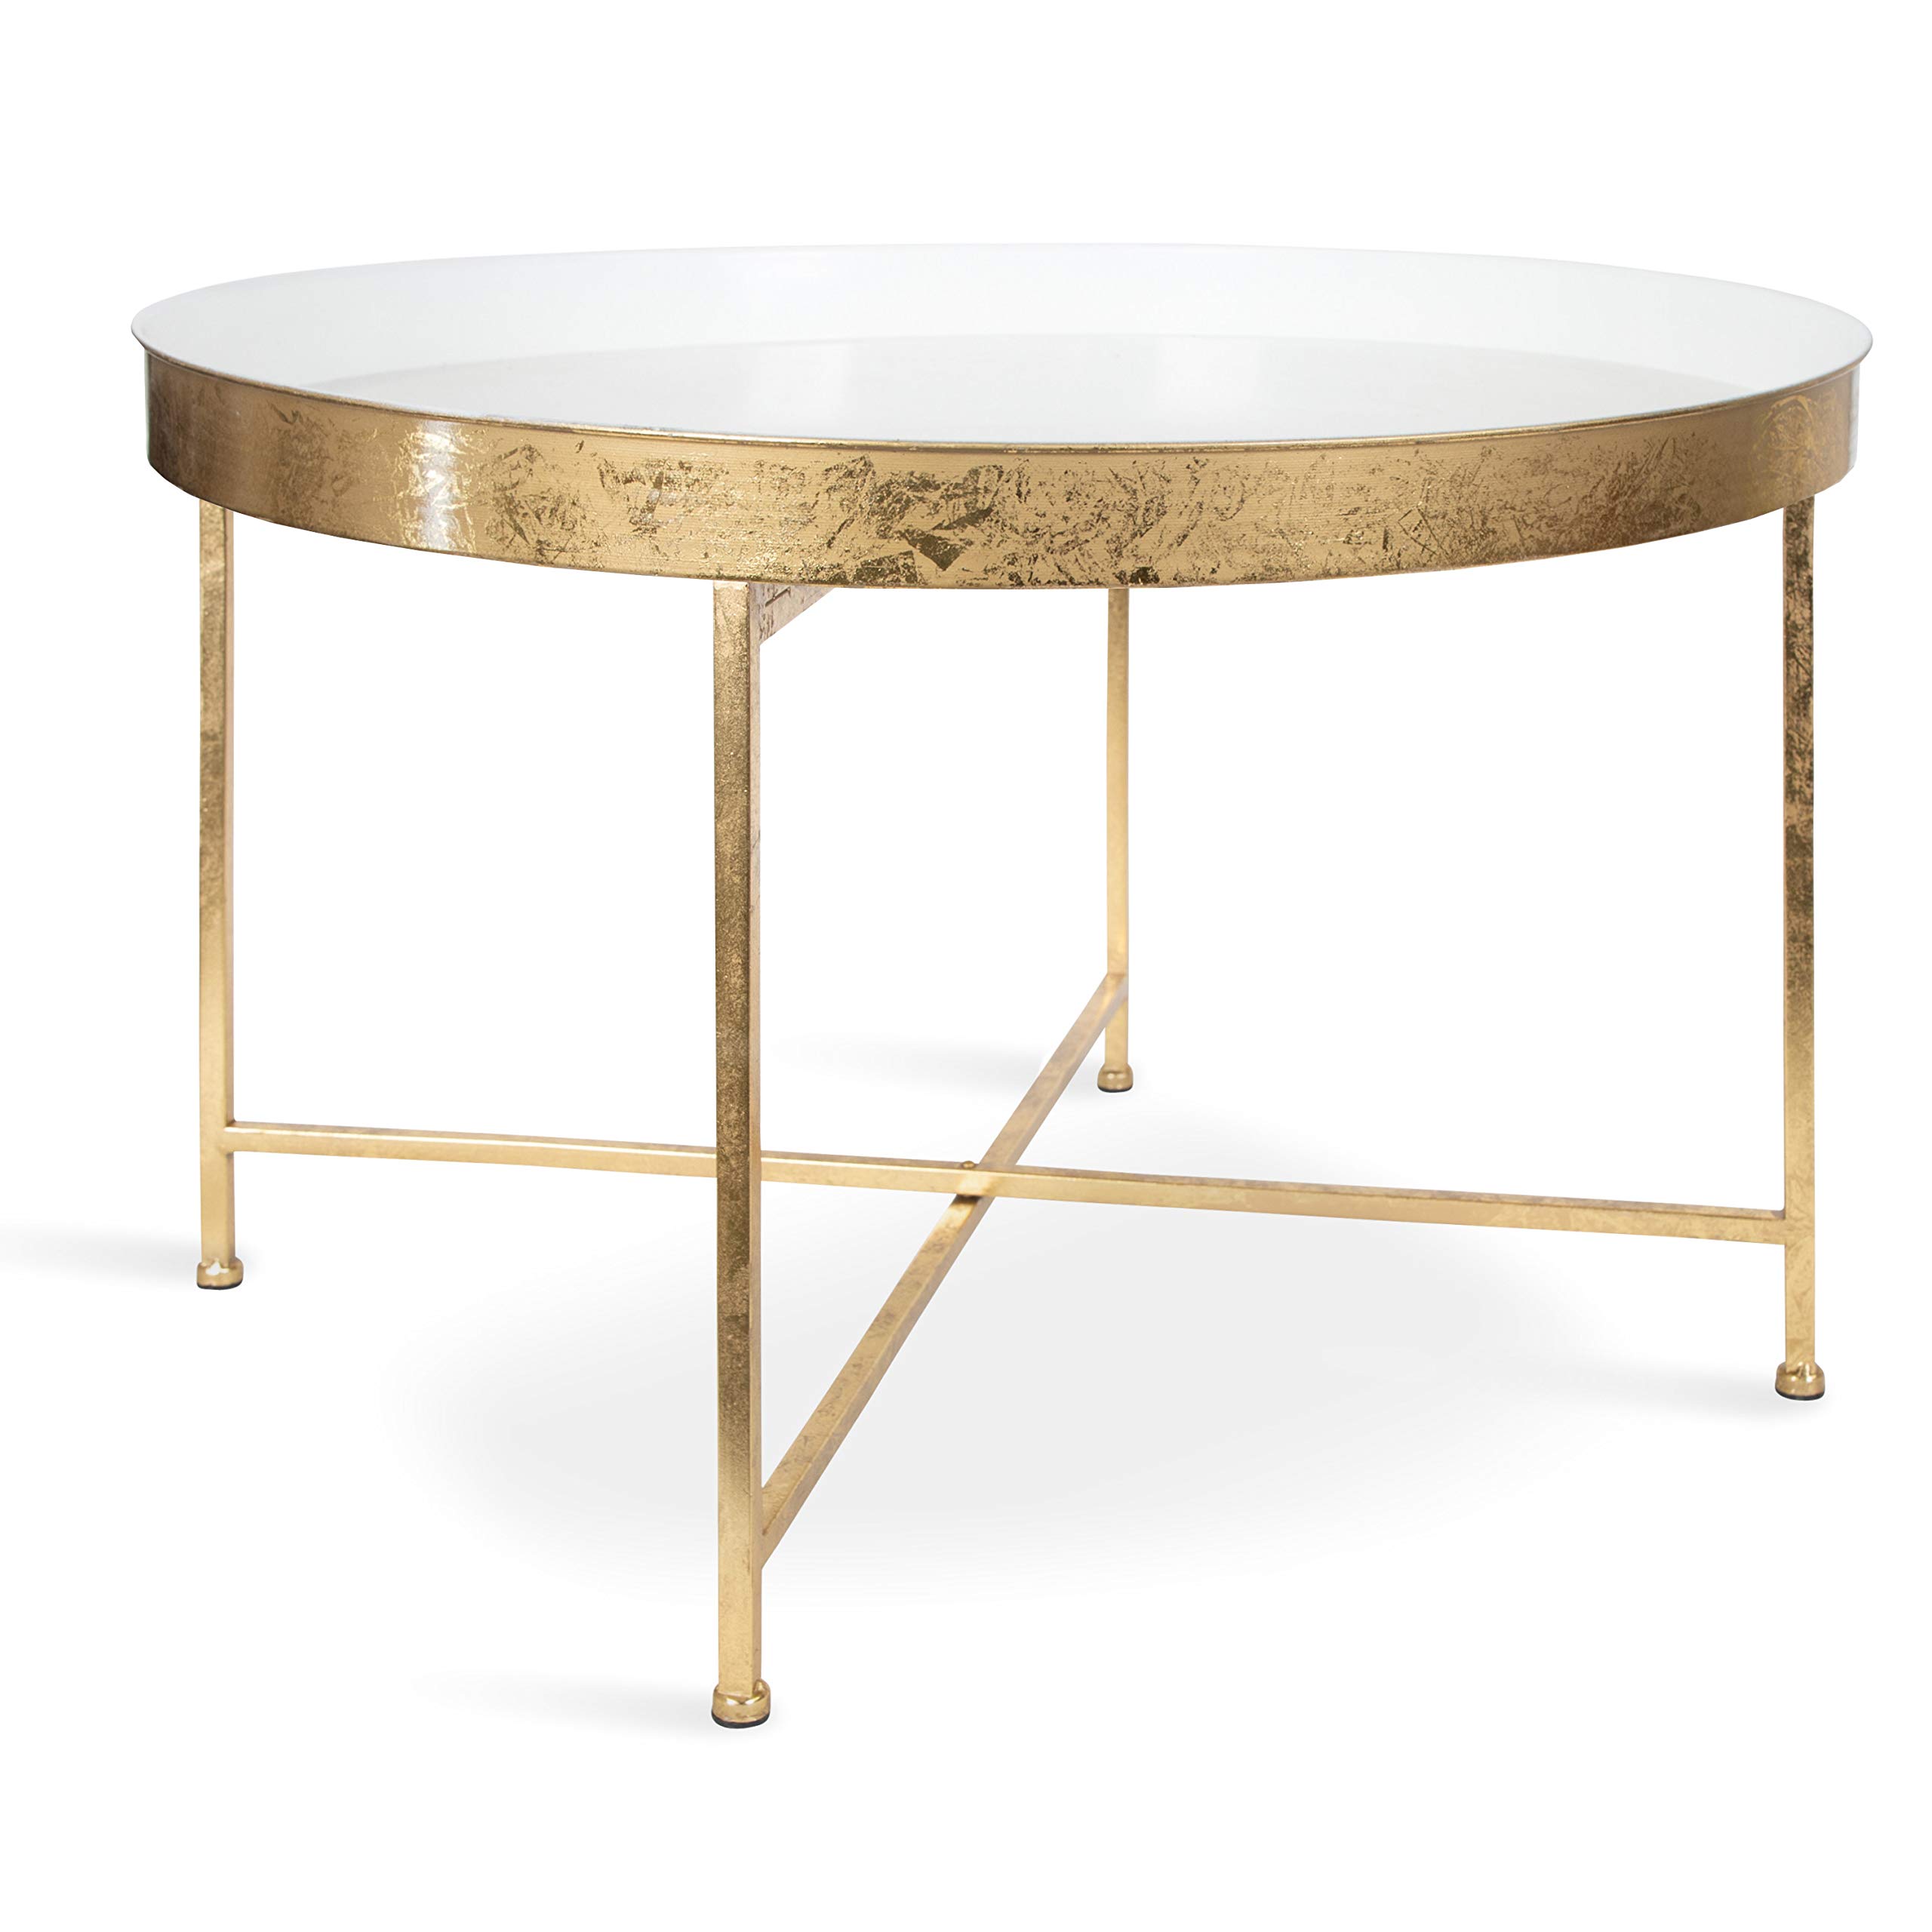 28.25" Kate and Laurel Celia Modern Glam Round Metal Foldable Coffee Table (White and Gold Leaf) $87.55 + Free Shipping